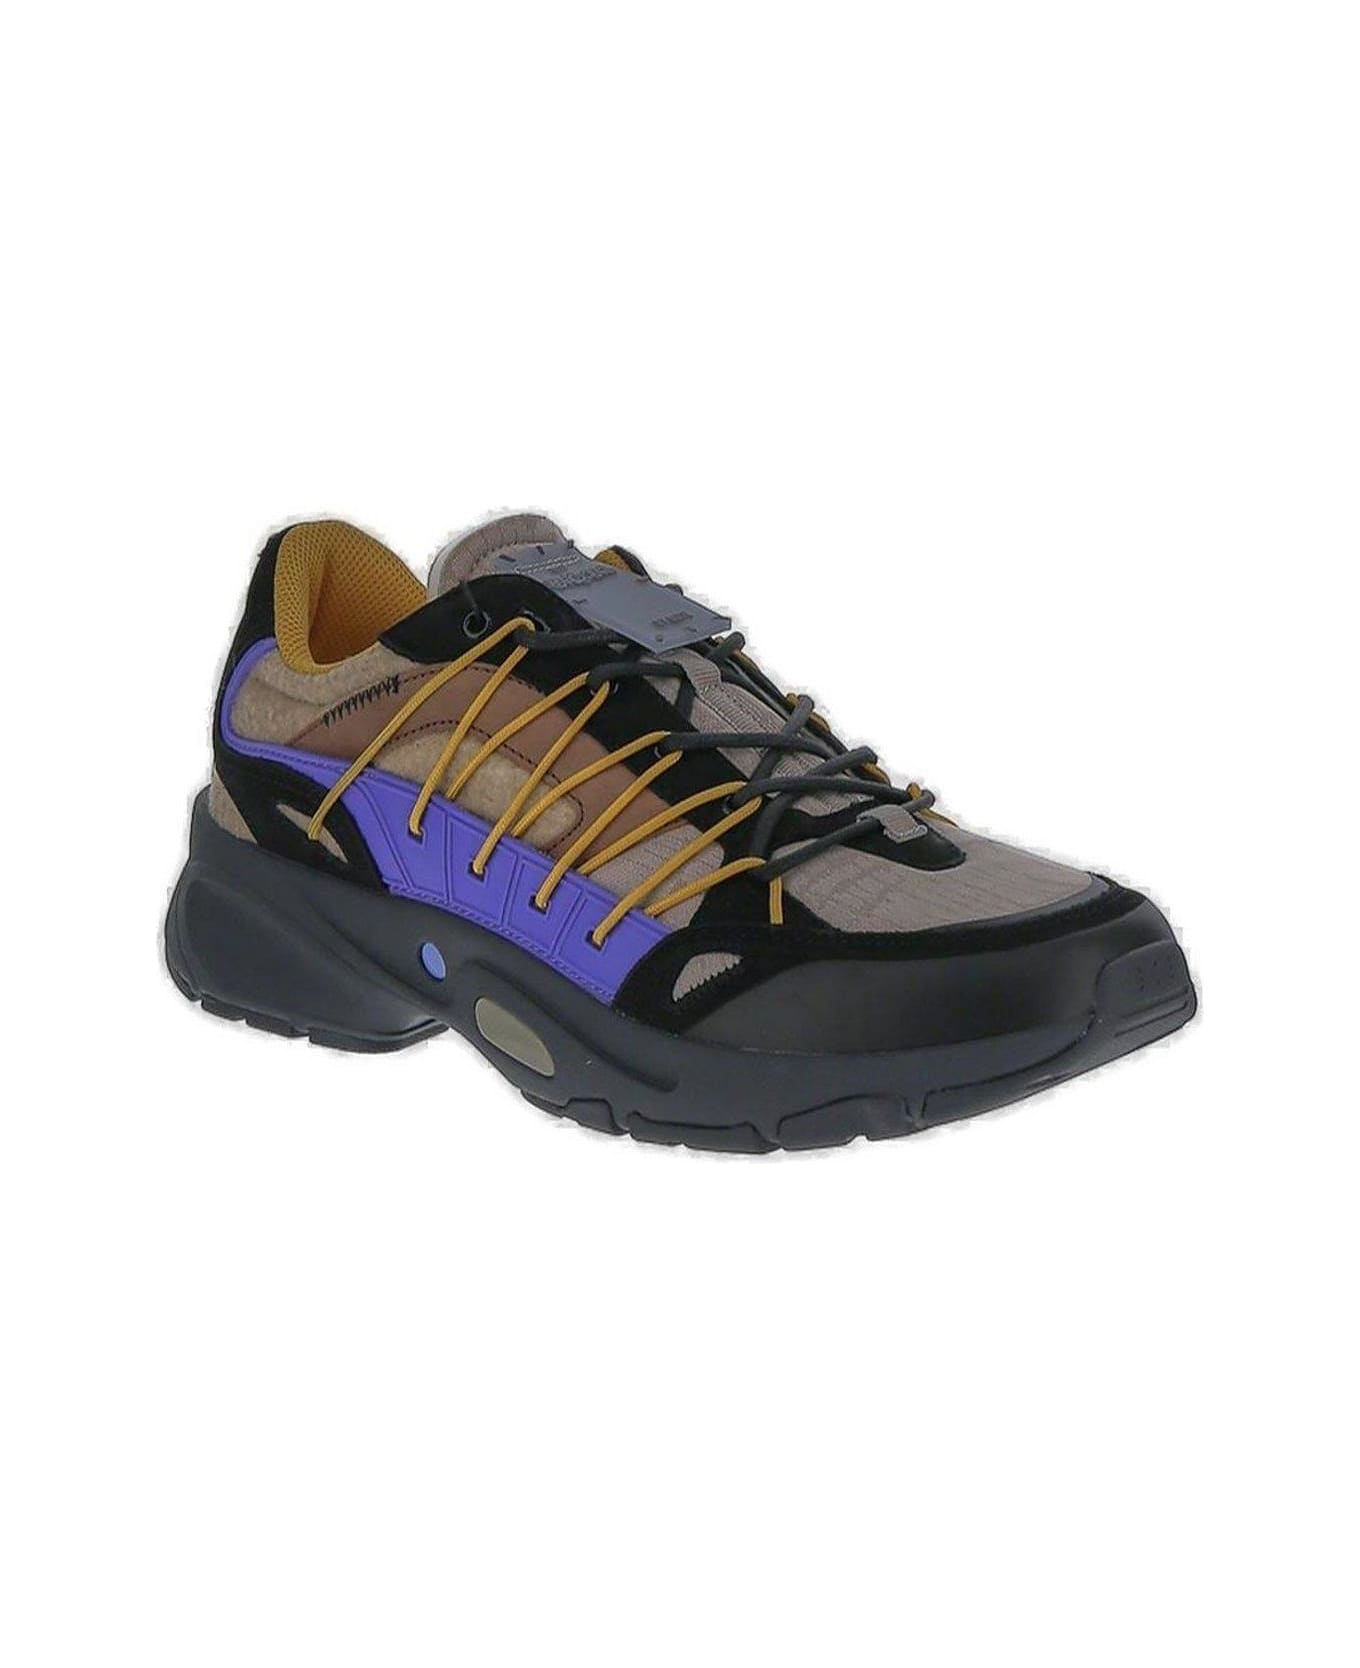 McQ Alexander McQueen B12 Aratana 1.3 Lace-up Sneakers - Multiple colors